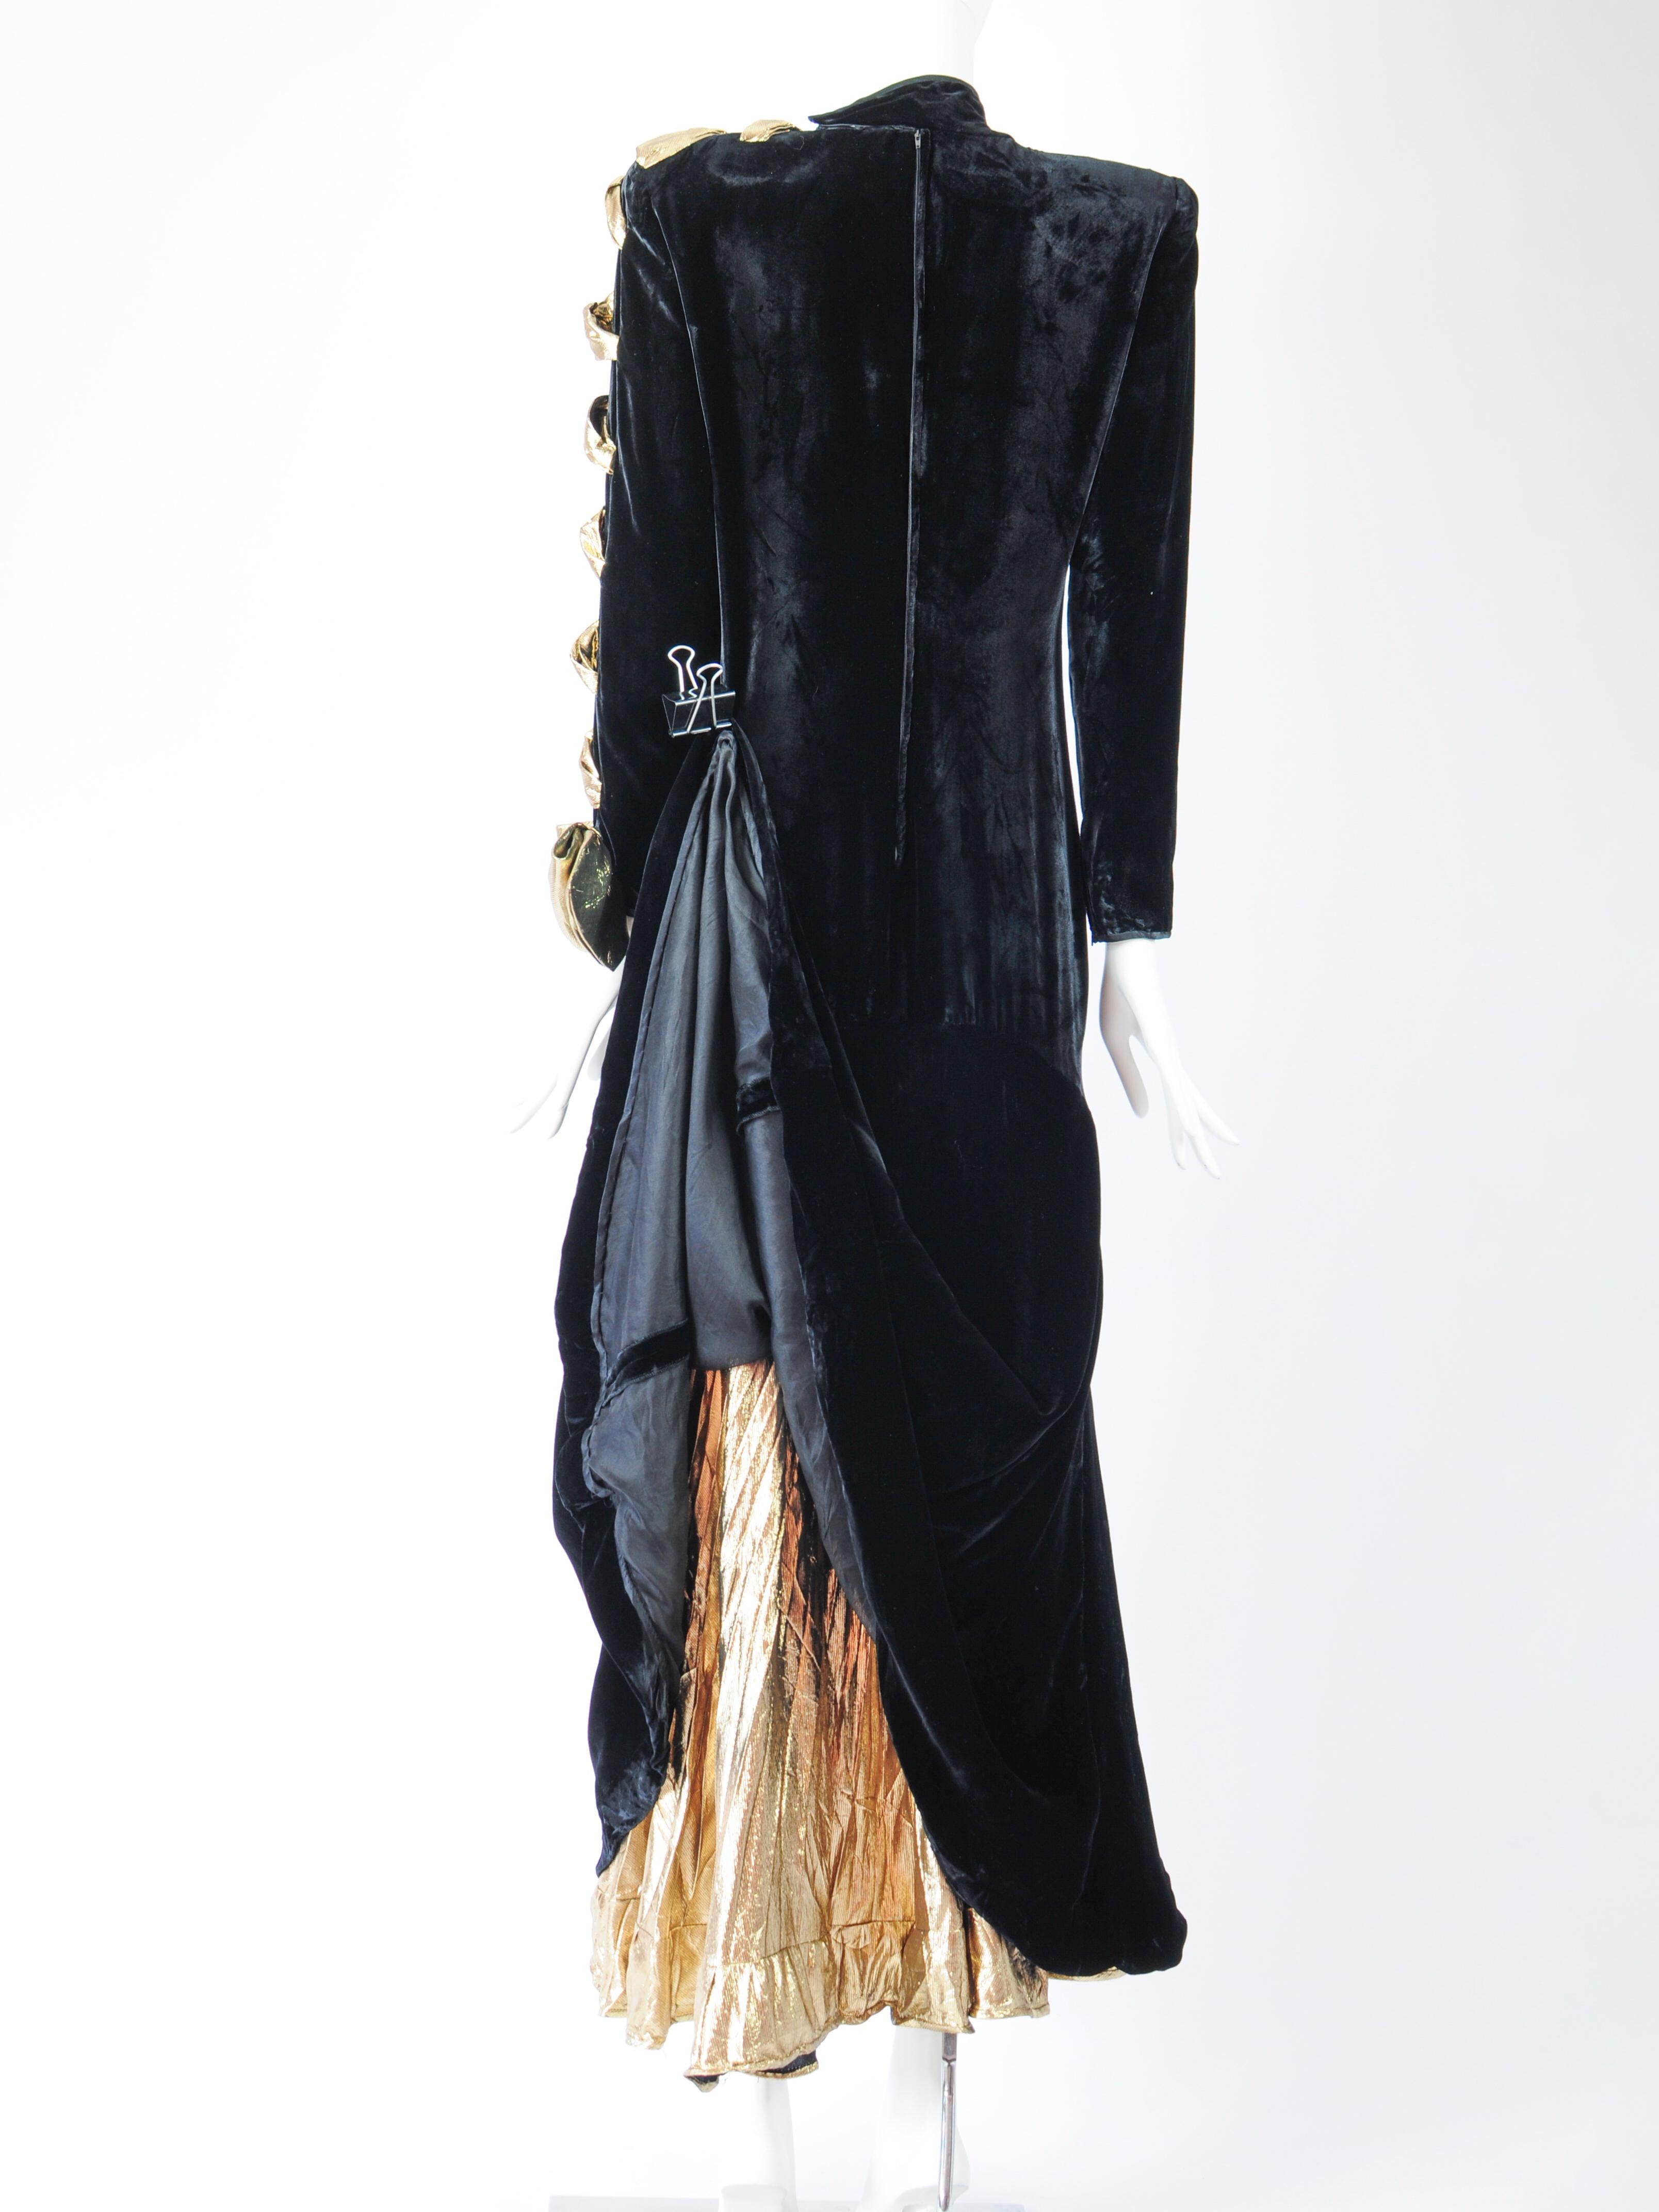 Women's Valentino Boutique Black Velvet Long Sleeve Gown with Gold Lamé Bow Sleeve 1980s